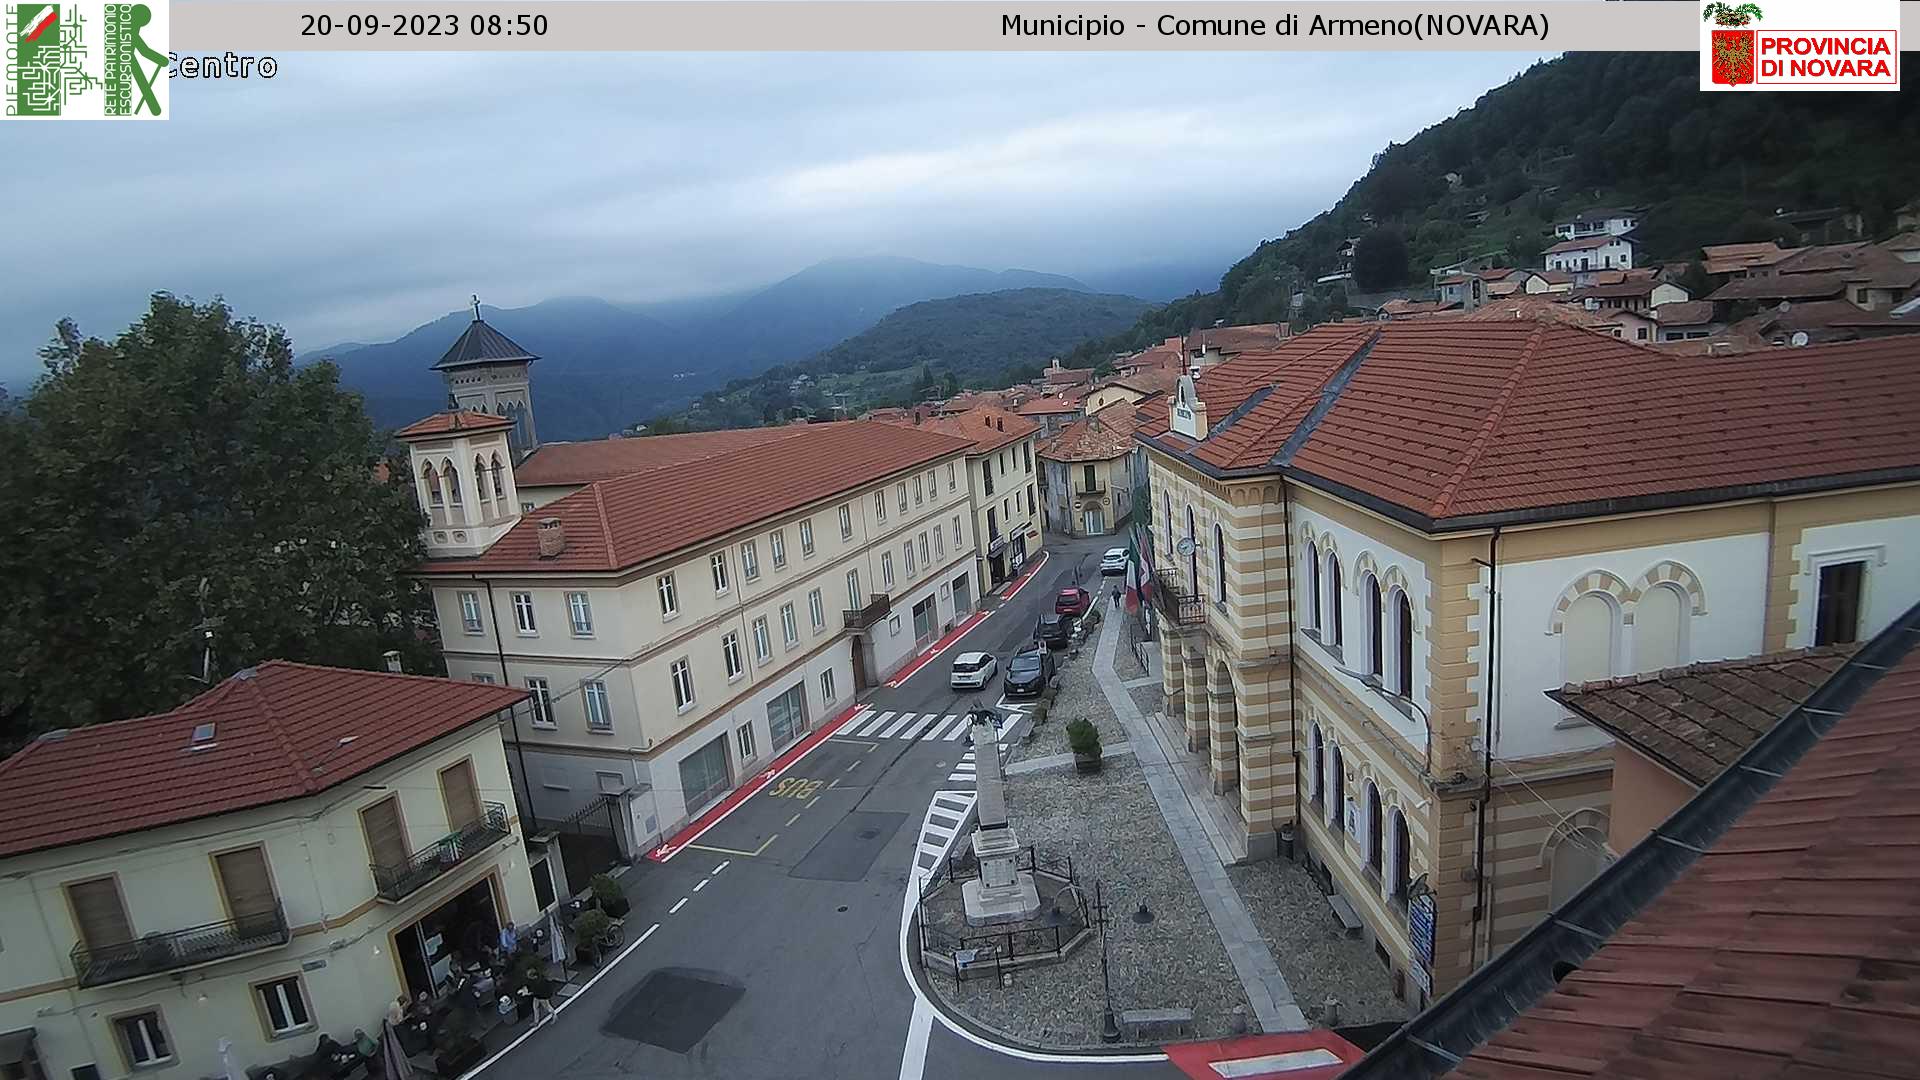 Live from Armeno! Use your browser refresh button to update!